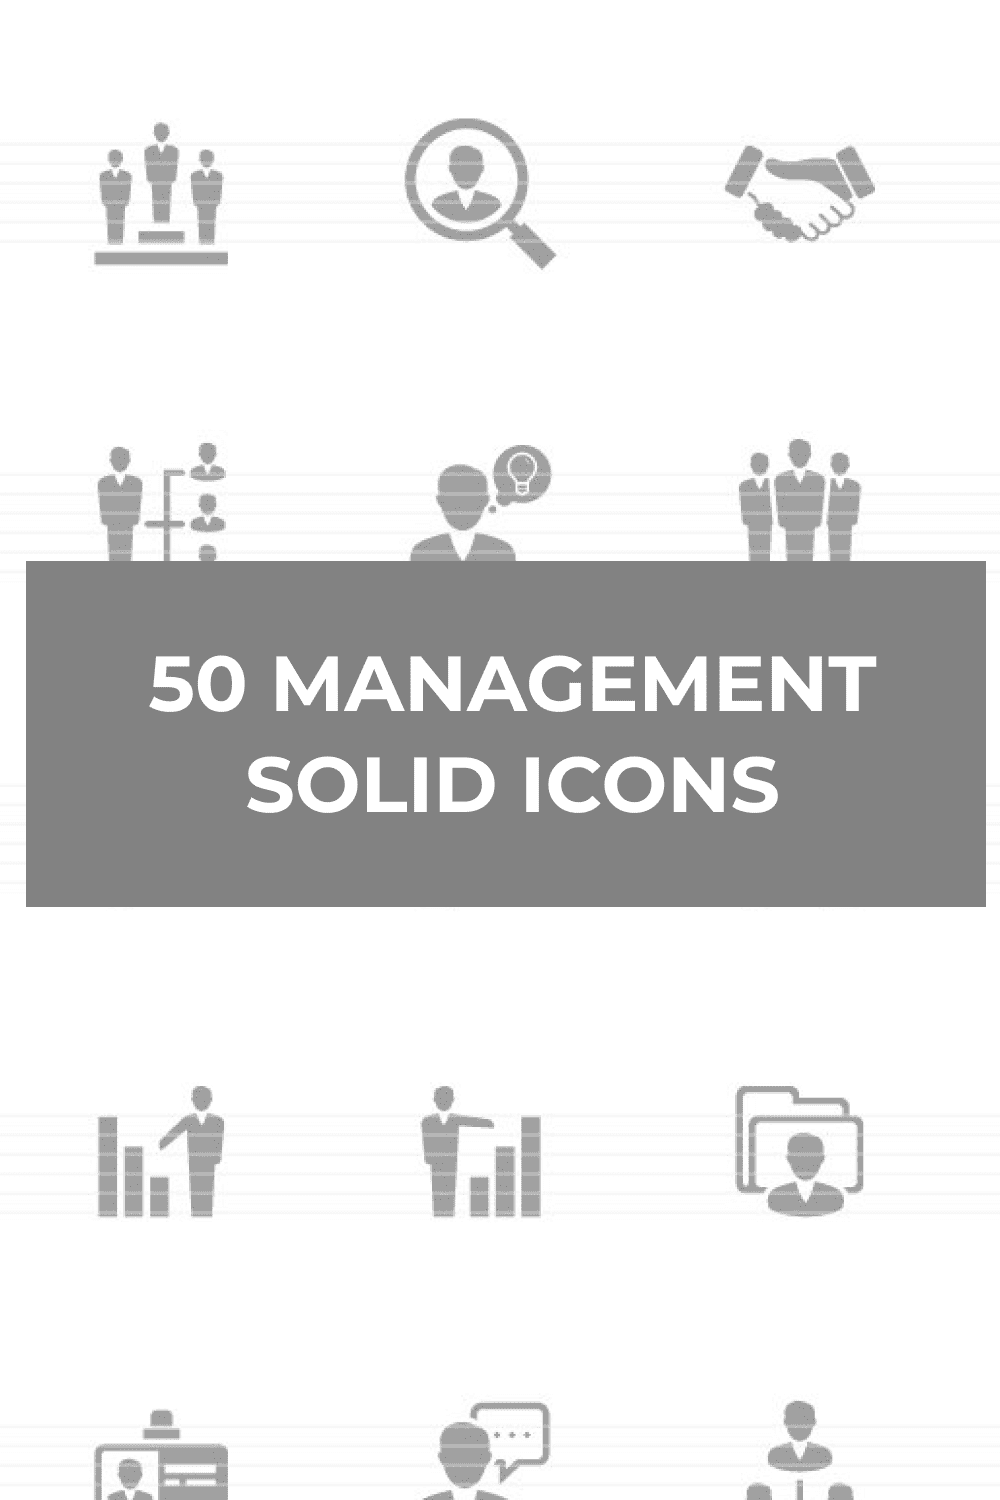 50 Management Solid Icons - Pinterest.